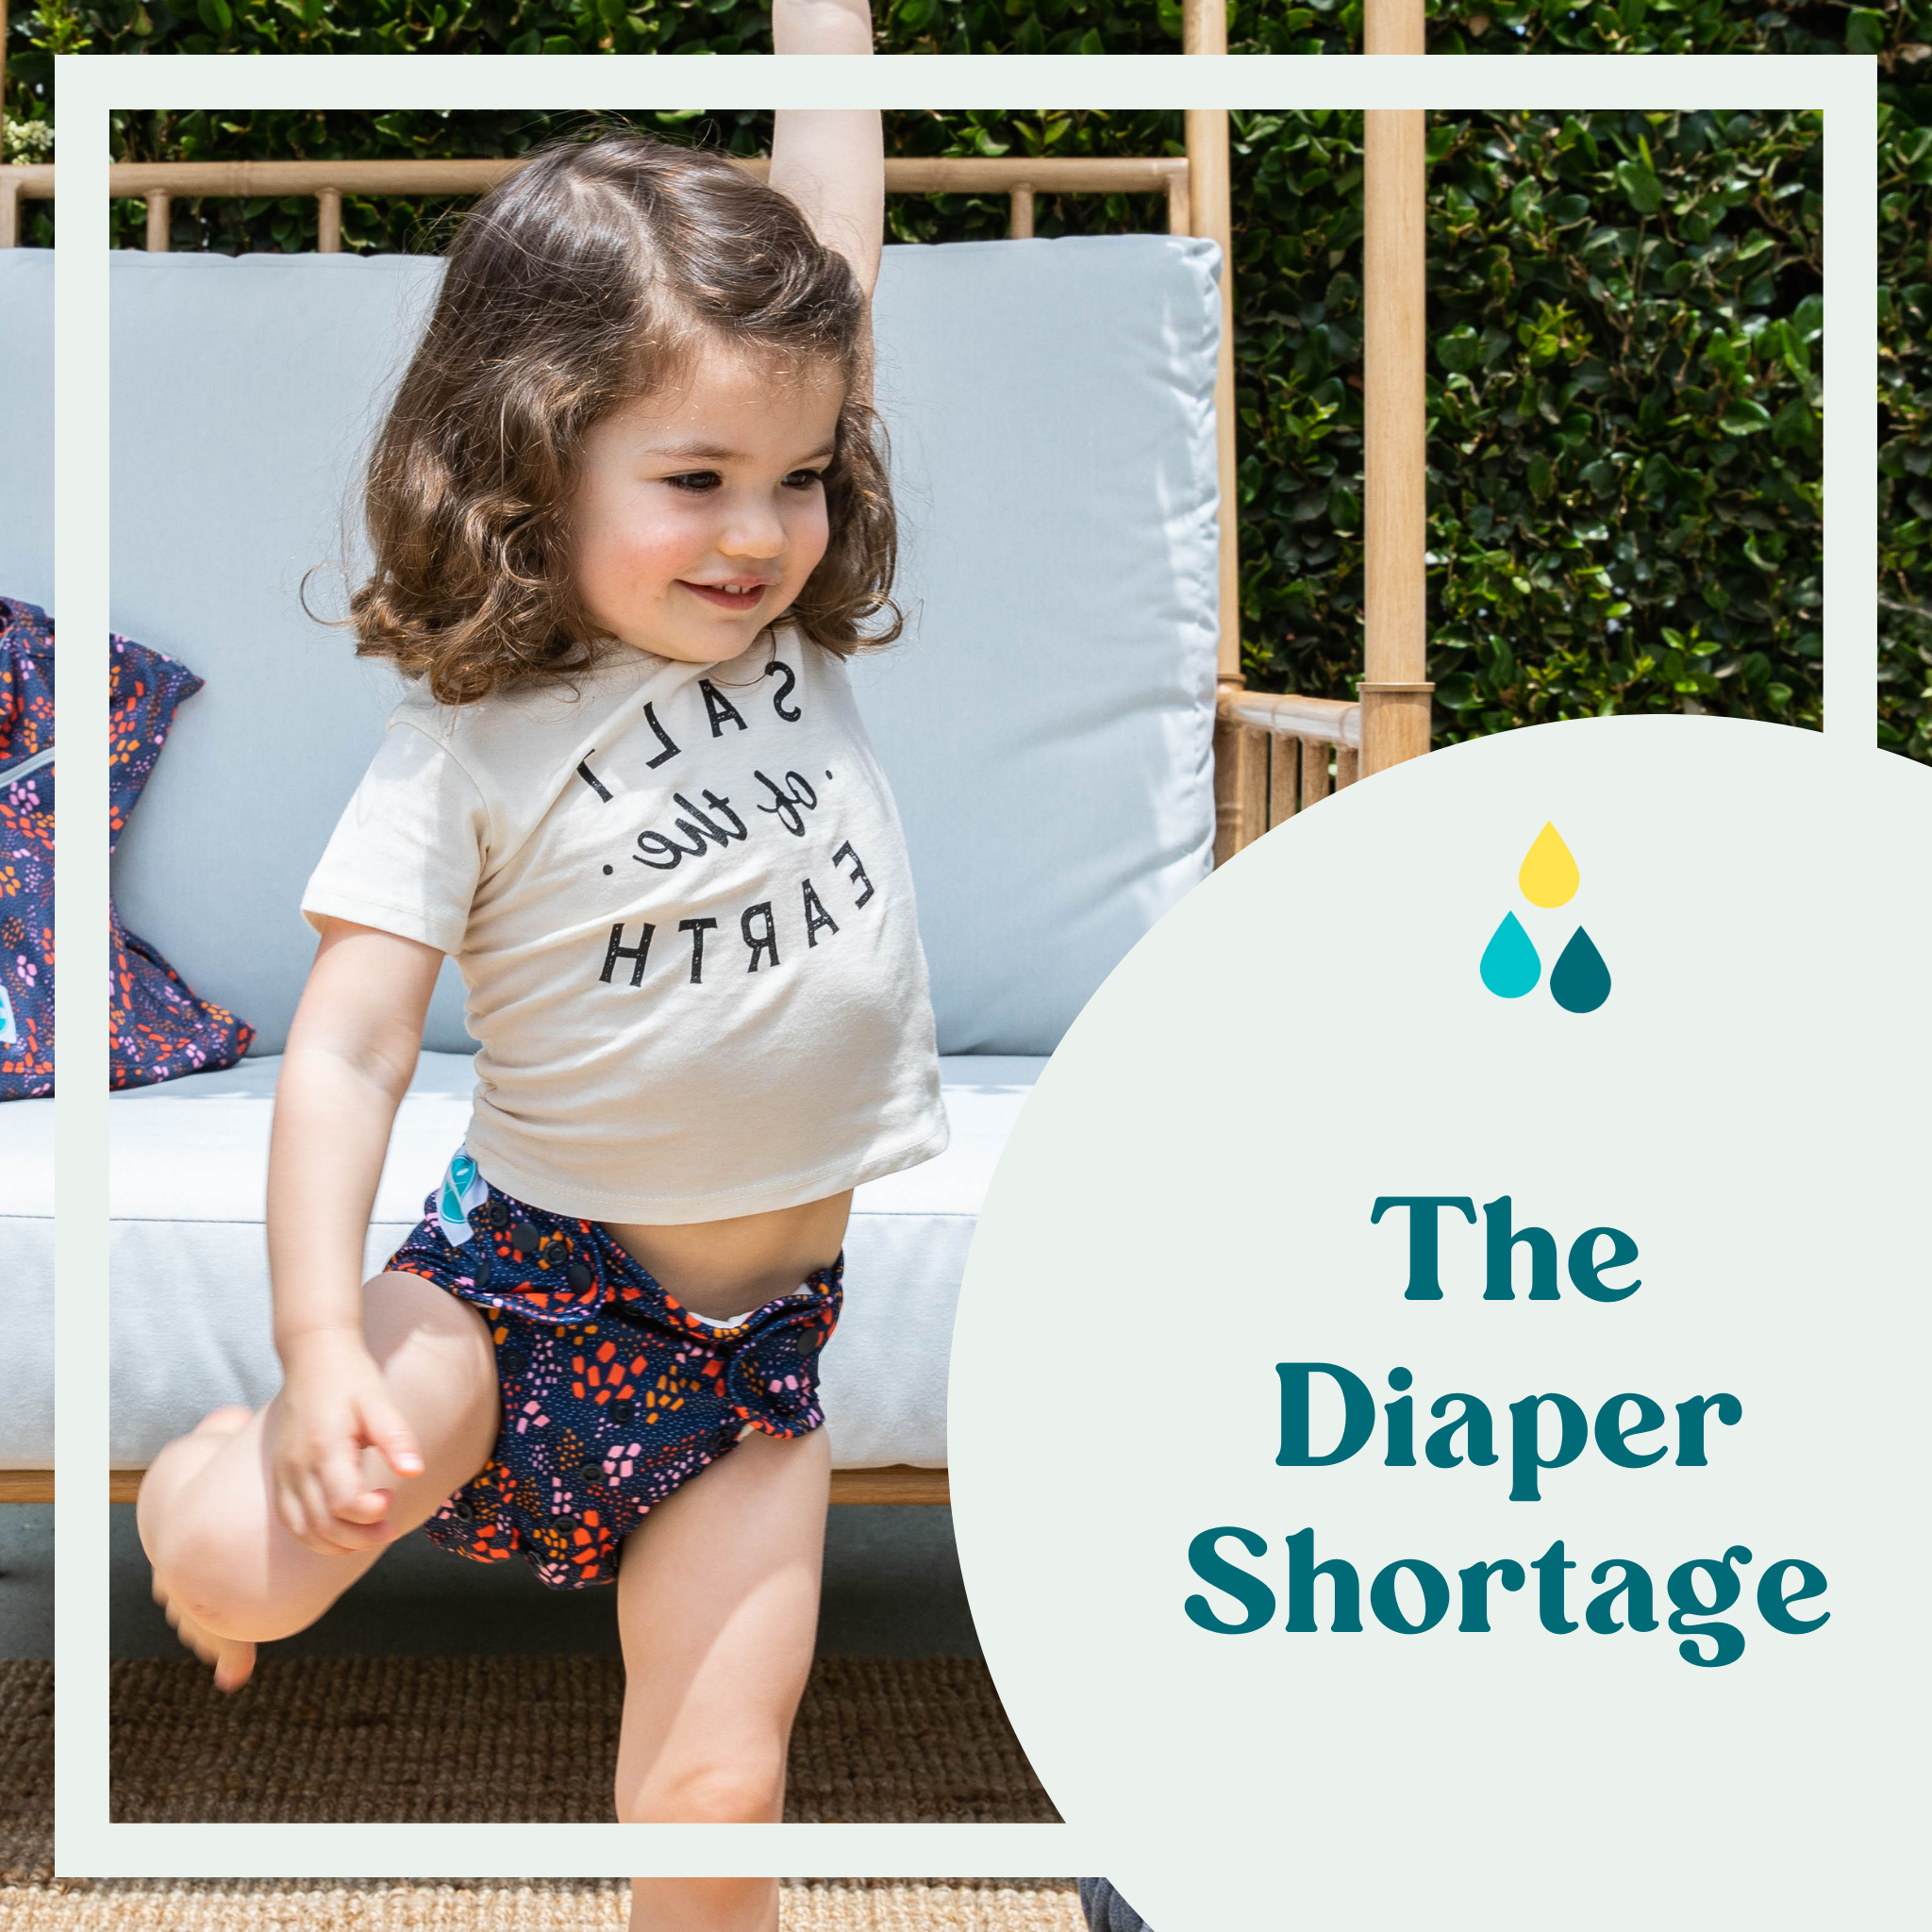 The Baby Diaper Shortage